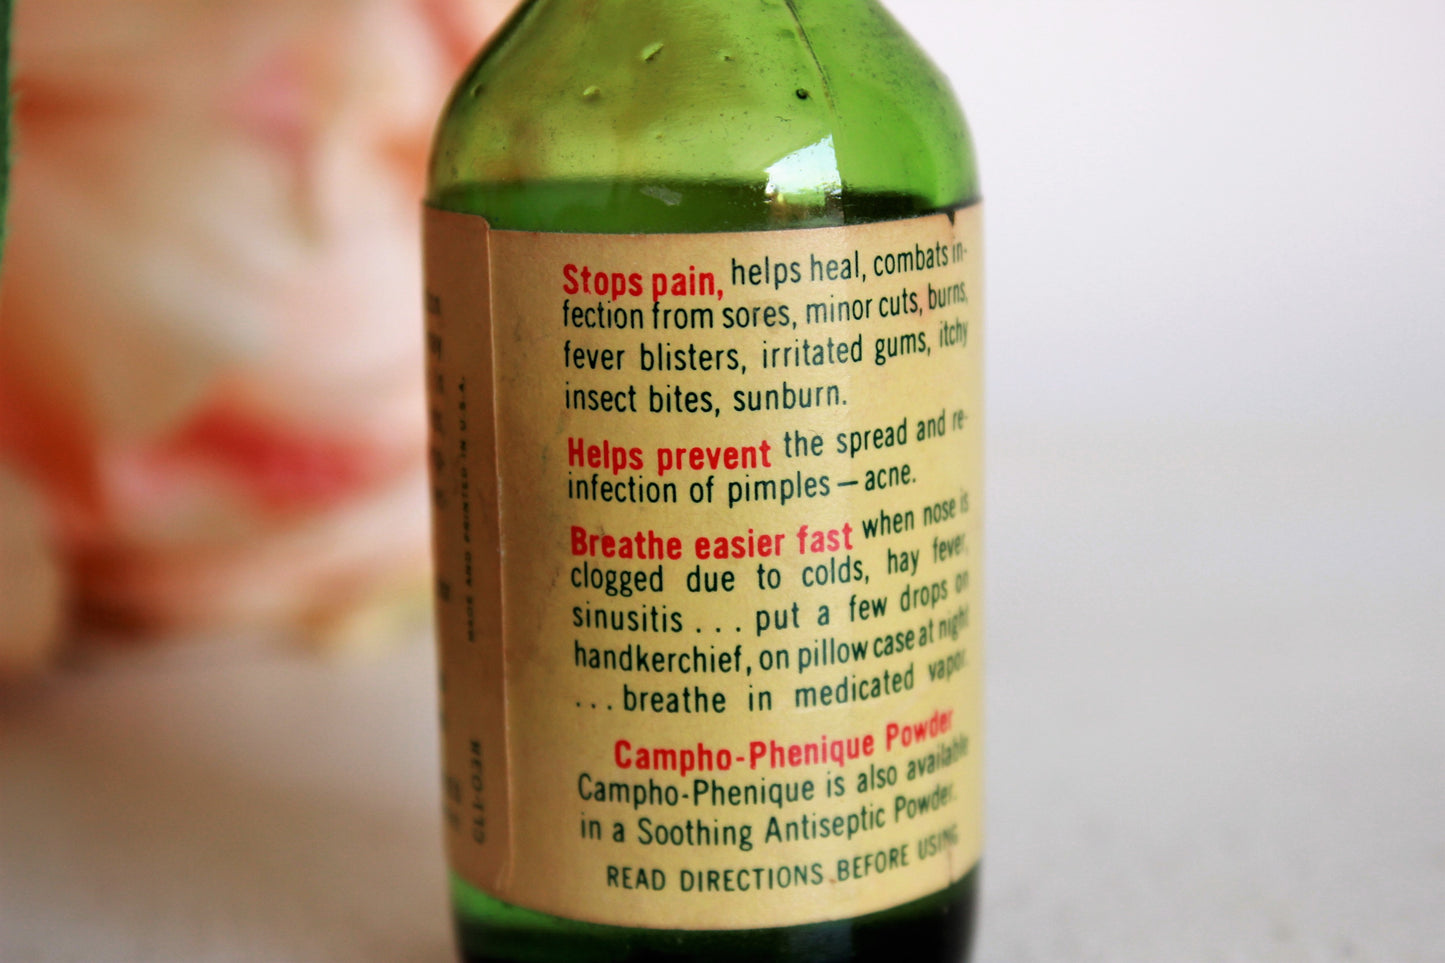 Vintage 1940s 1950s Campho-Phenique Liquid Antiseptic in Green Glass Bottle